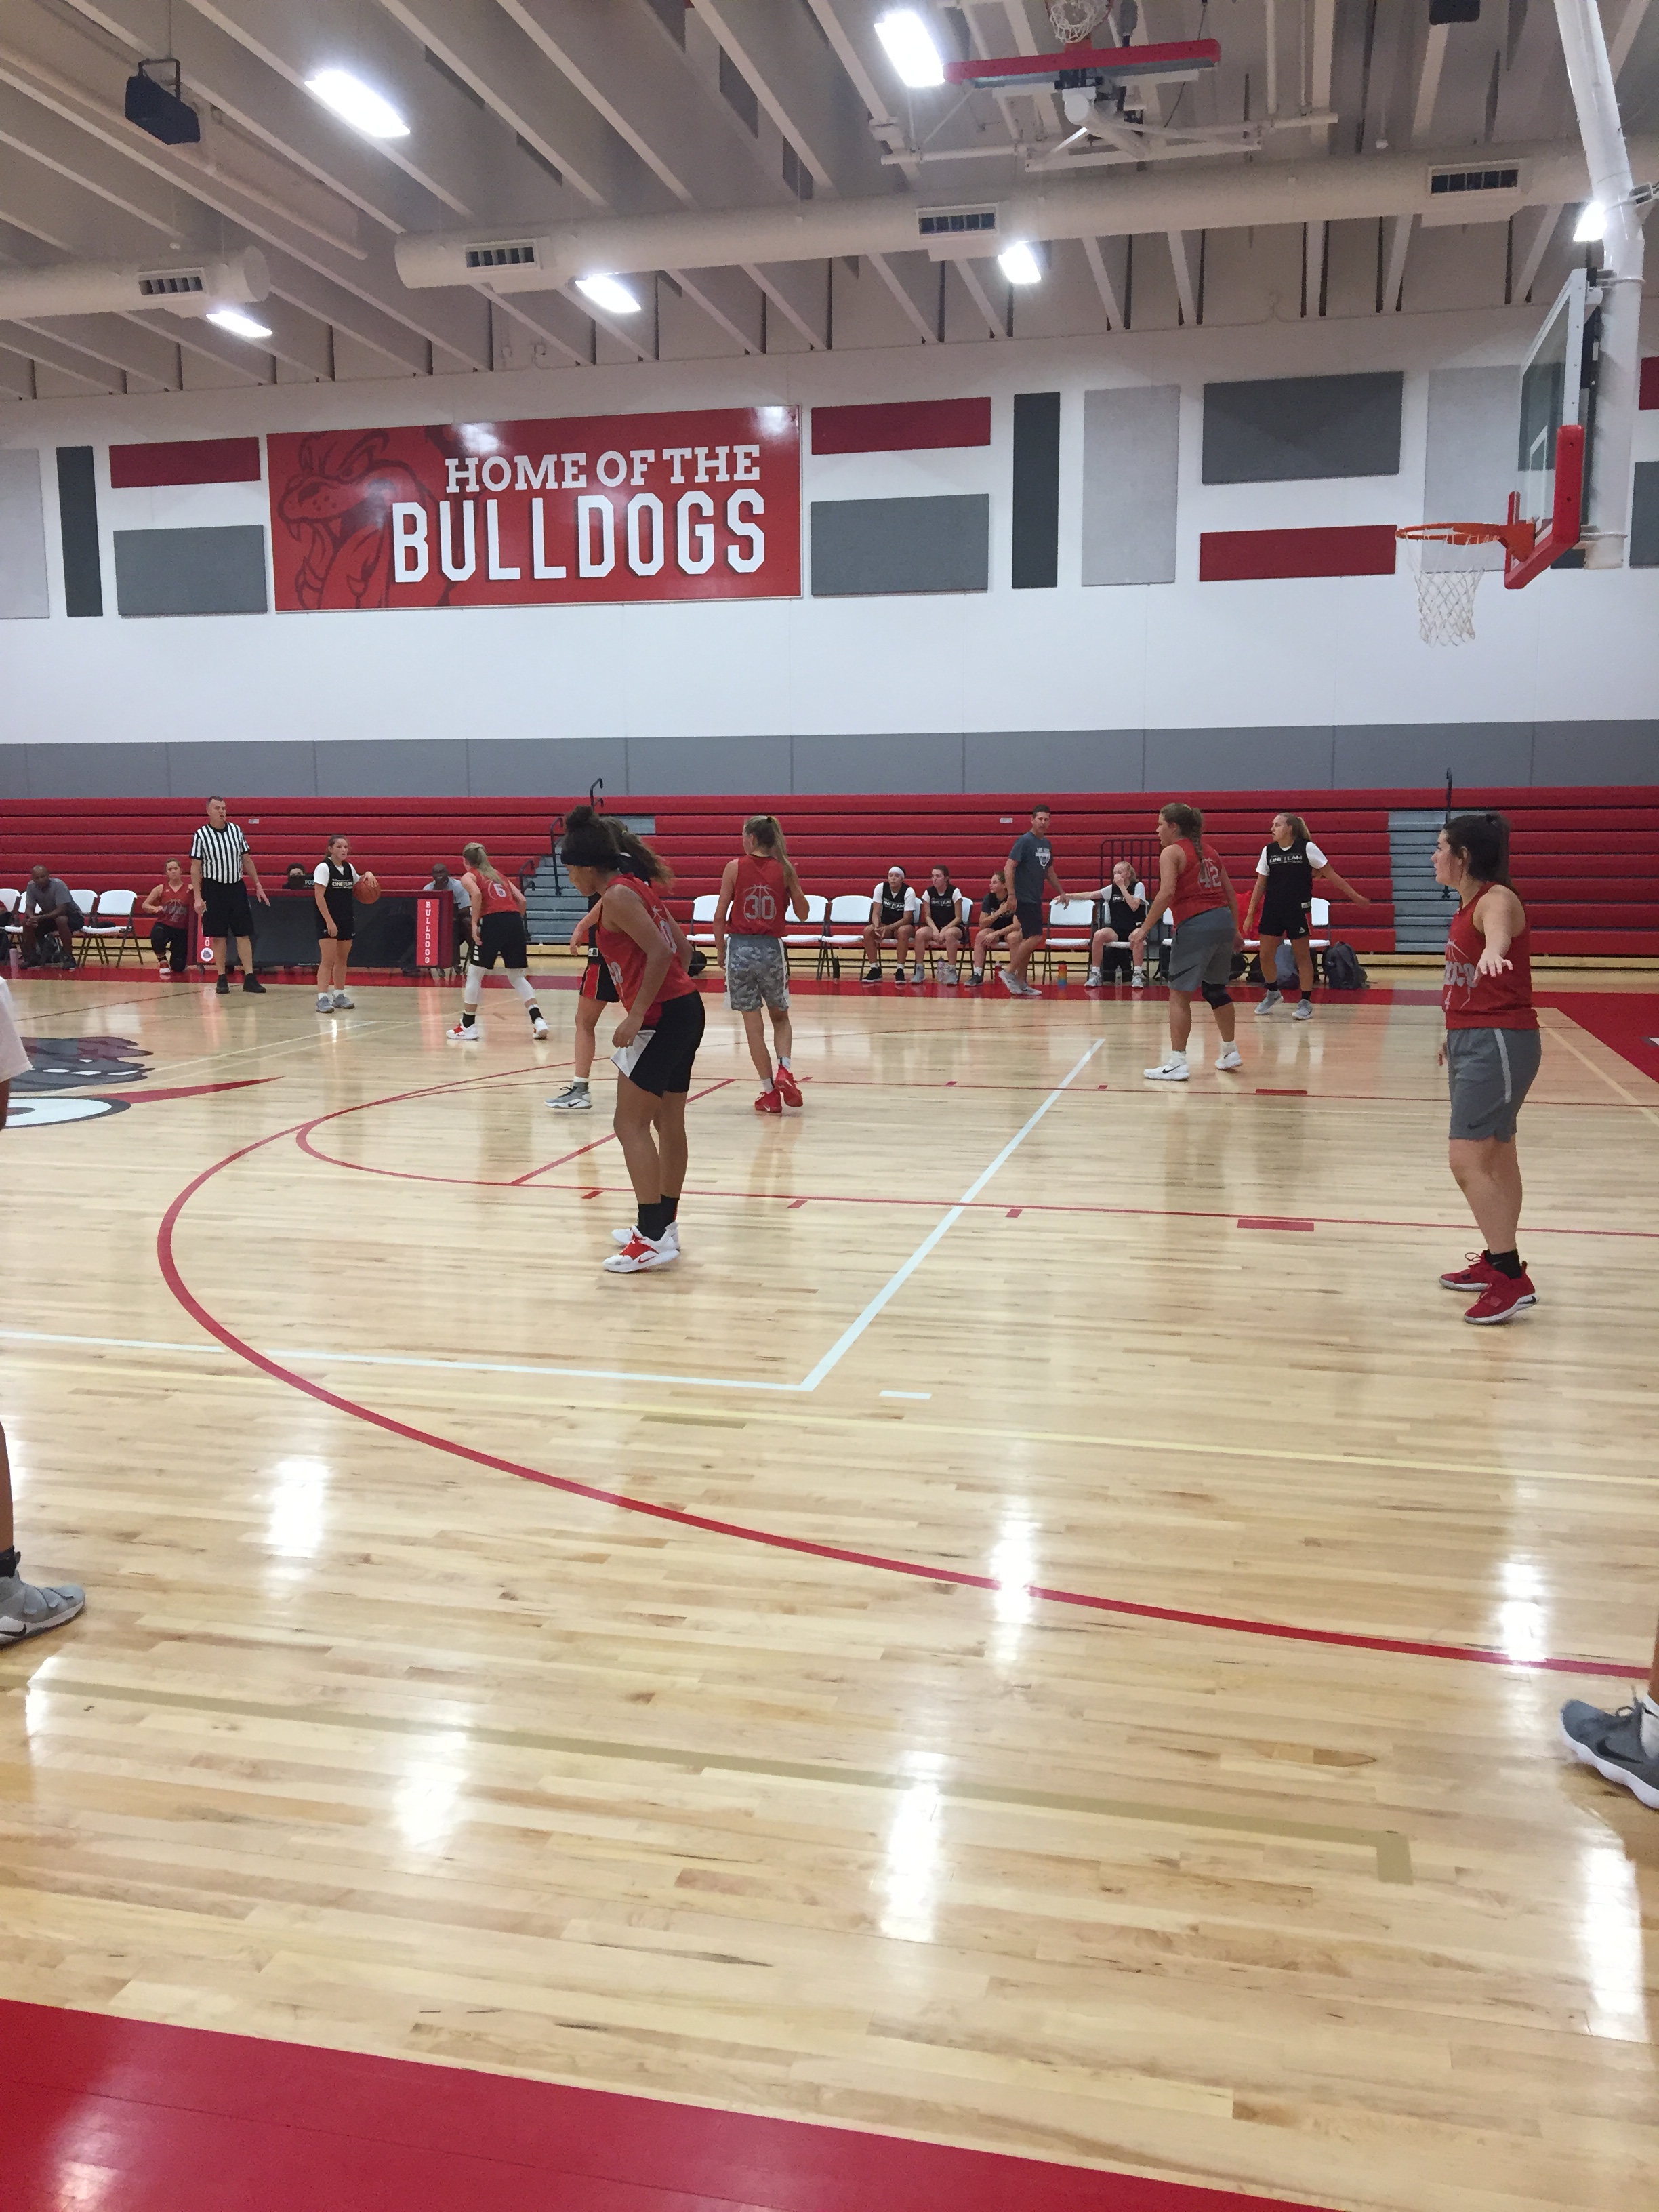 Licking Basketball Camp Ongoing In Mexico